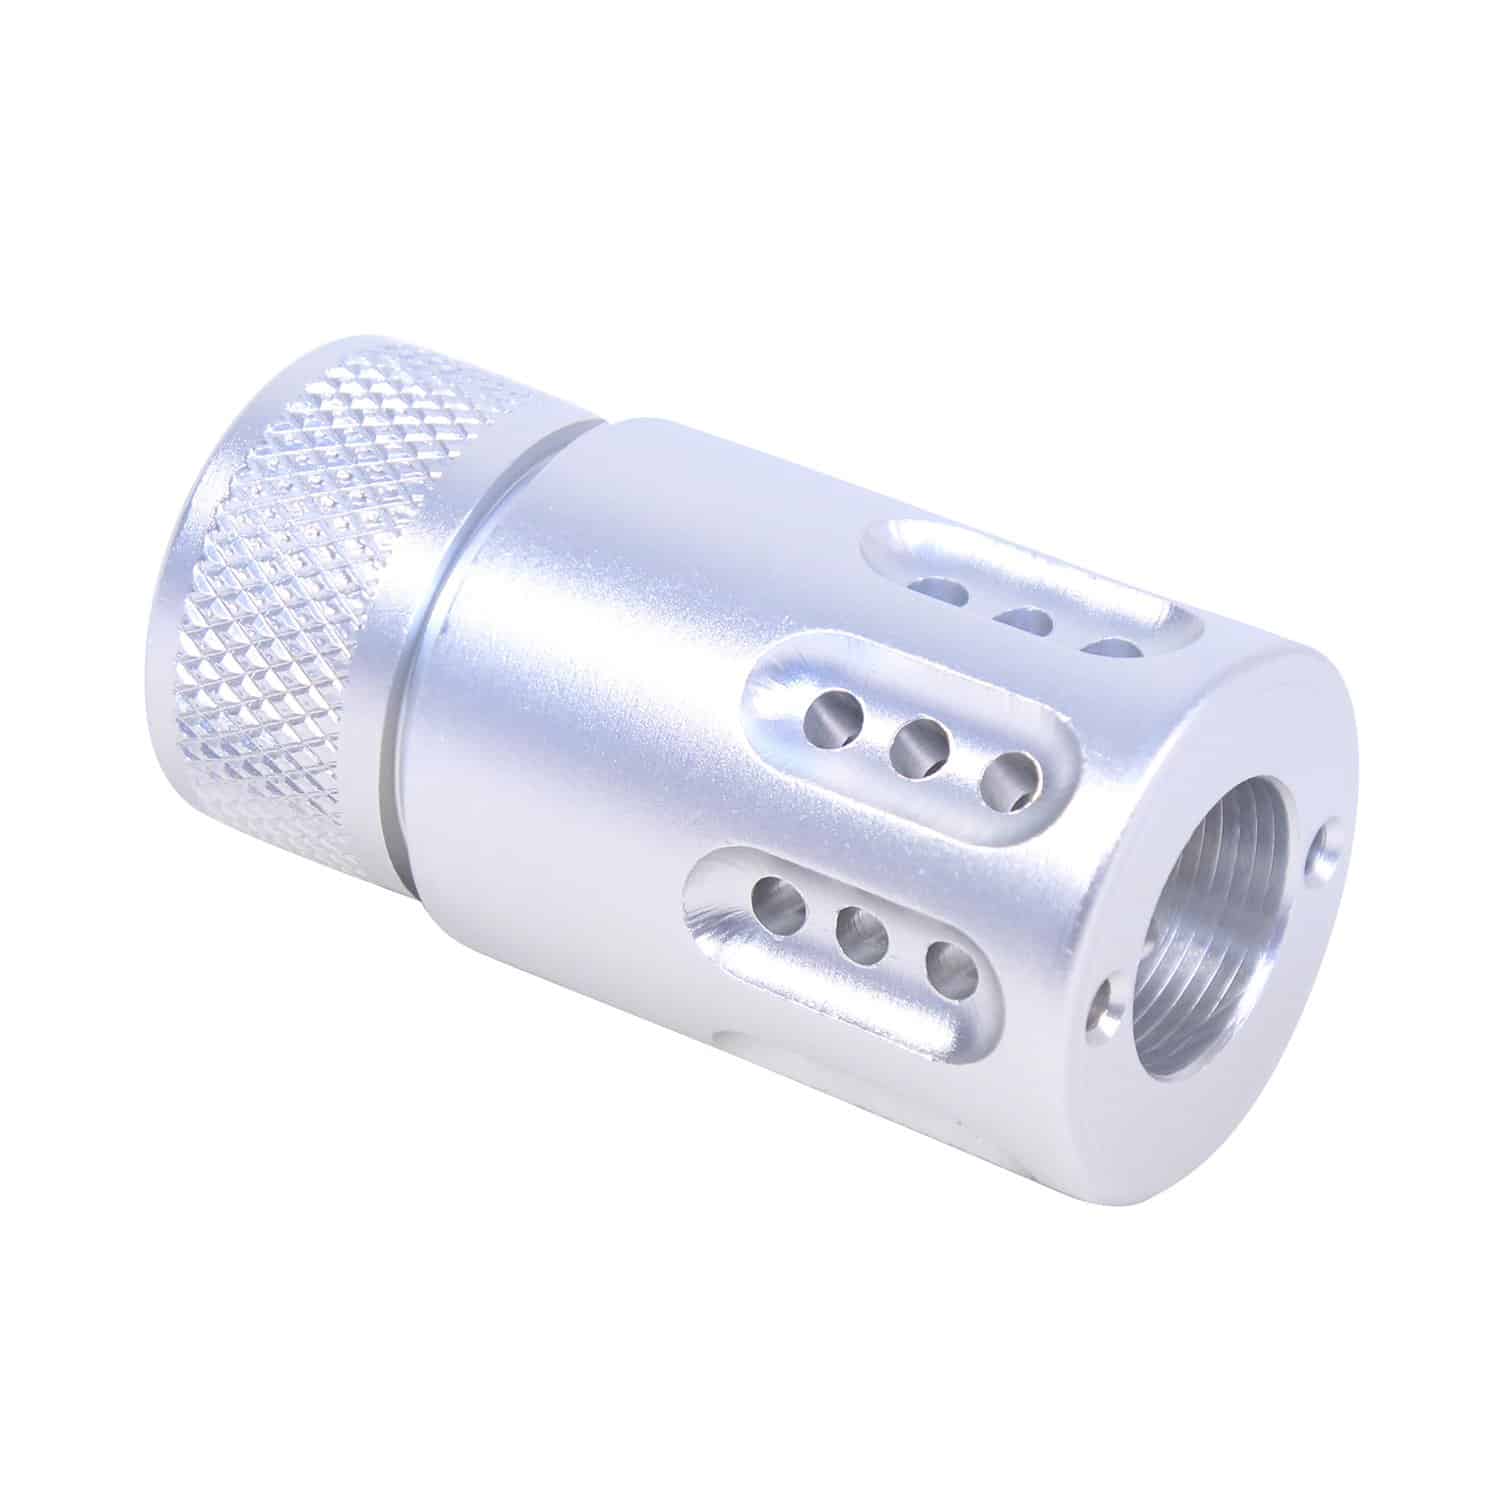 Silver .308 caliber mini muzzle brake and barrel shroud with clear anodize